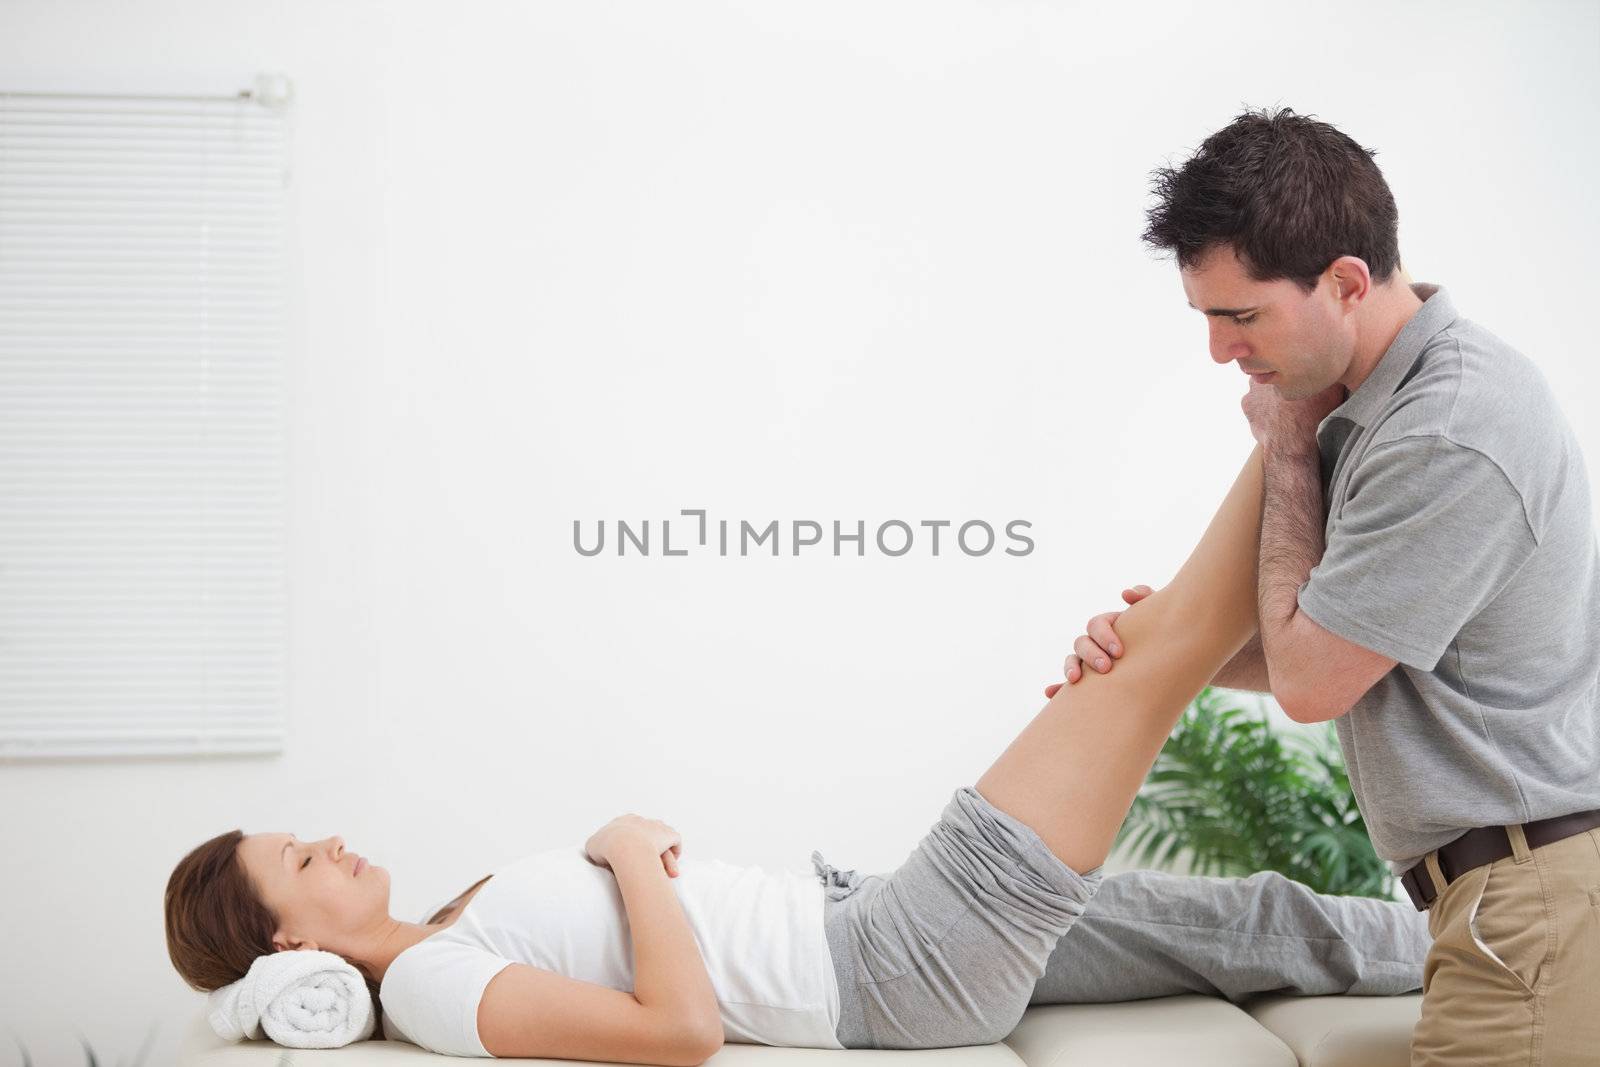 Chiropractor massaging a leg while placing it on his shoulder  by Wavebreakmedia